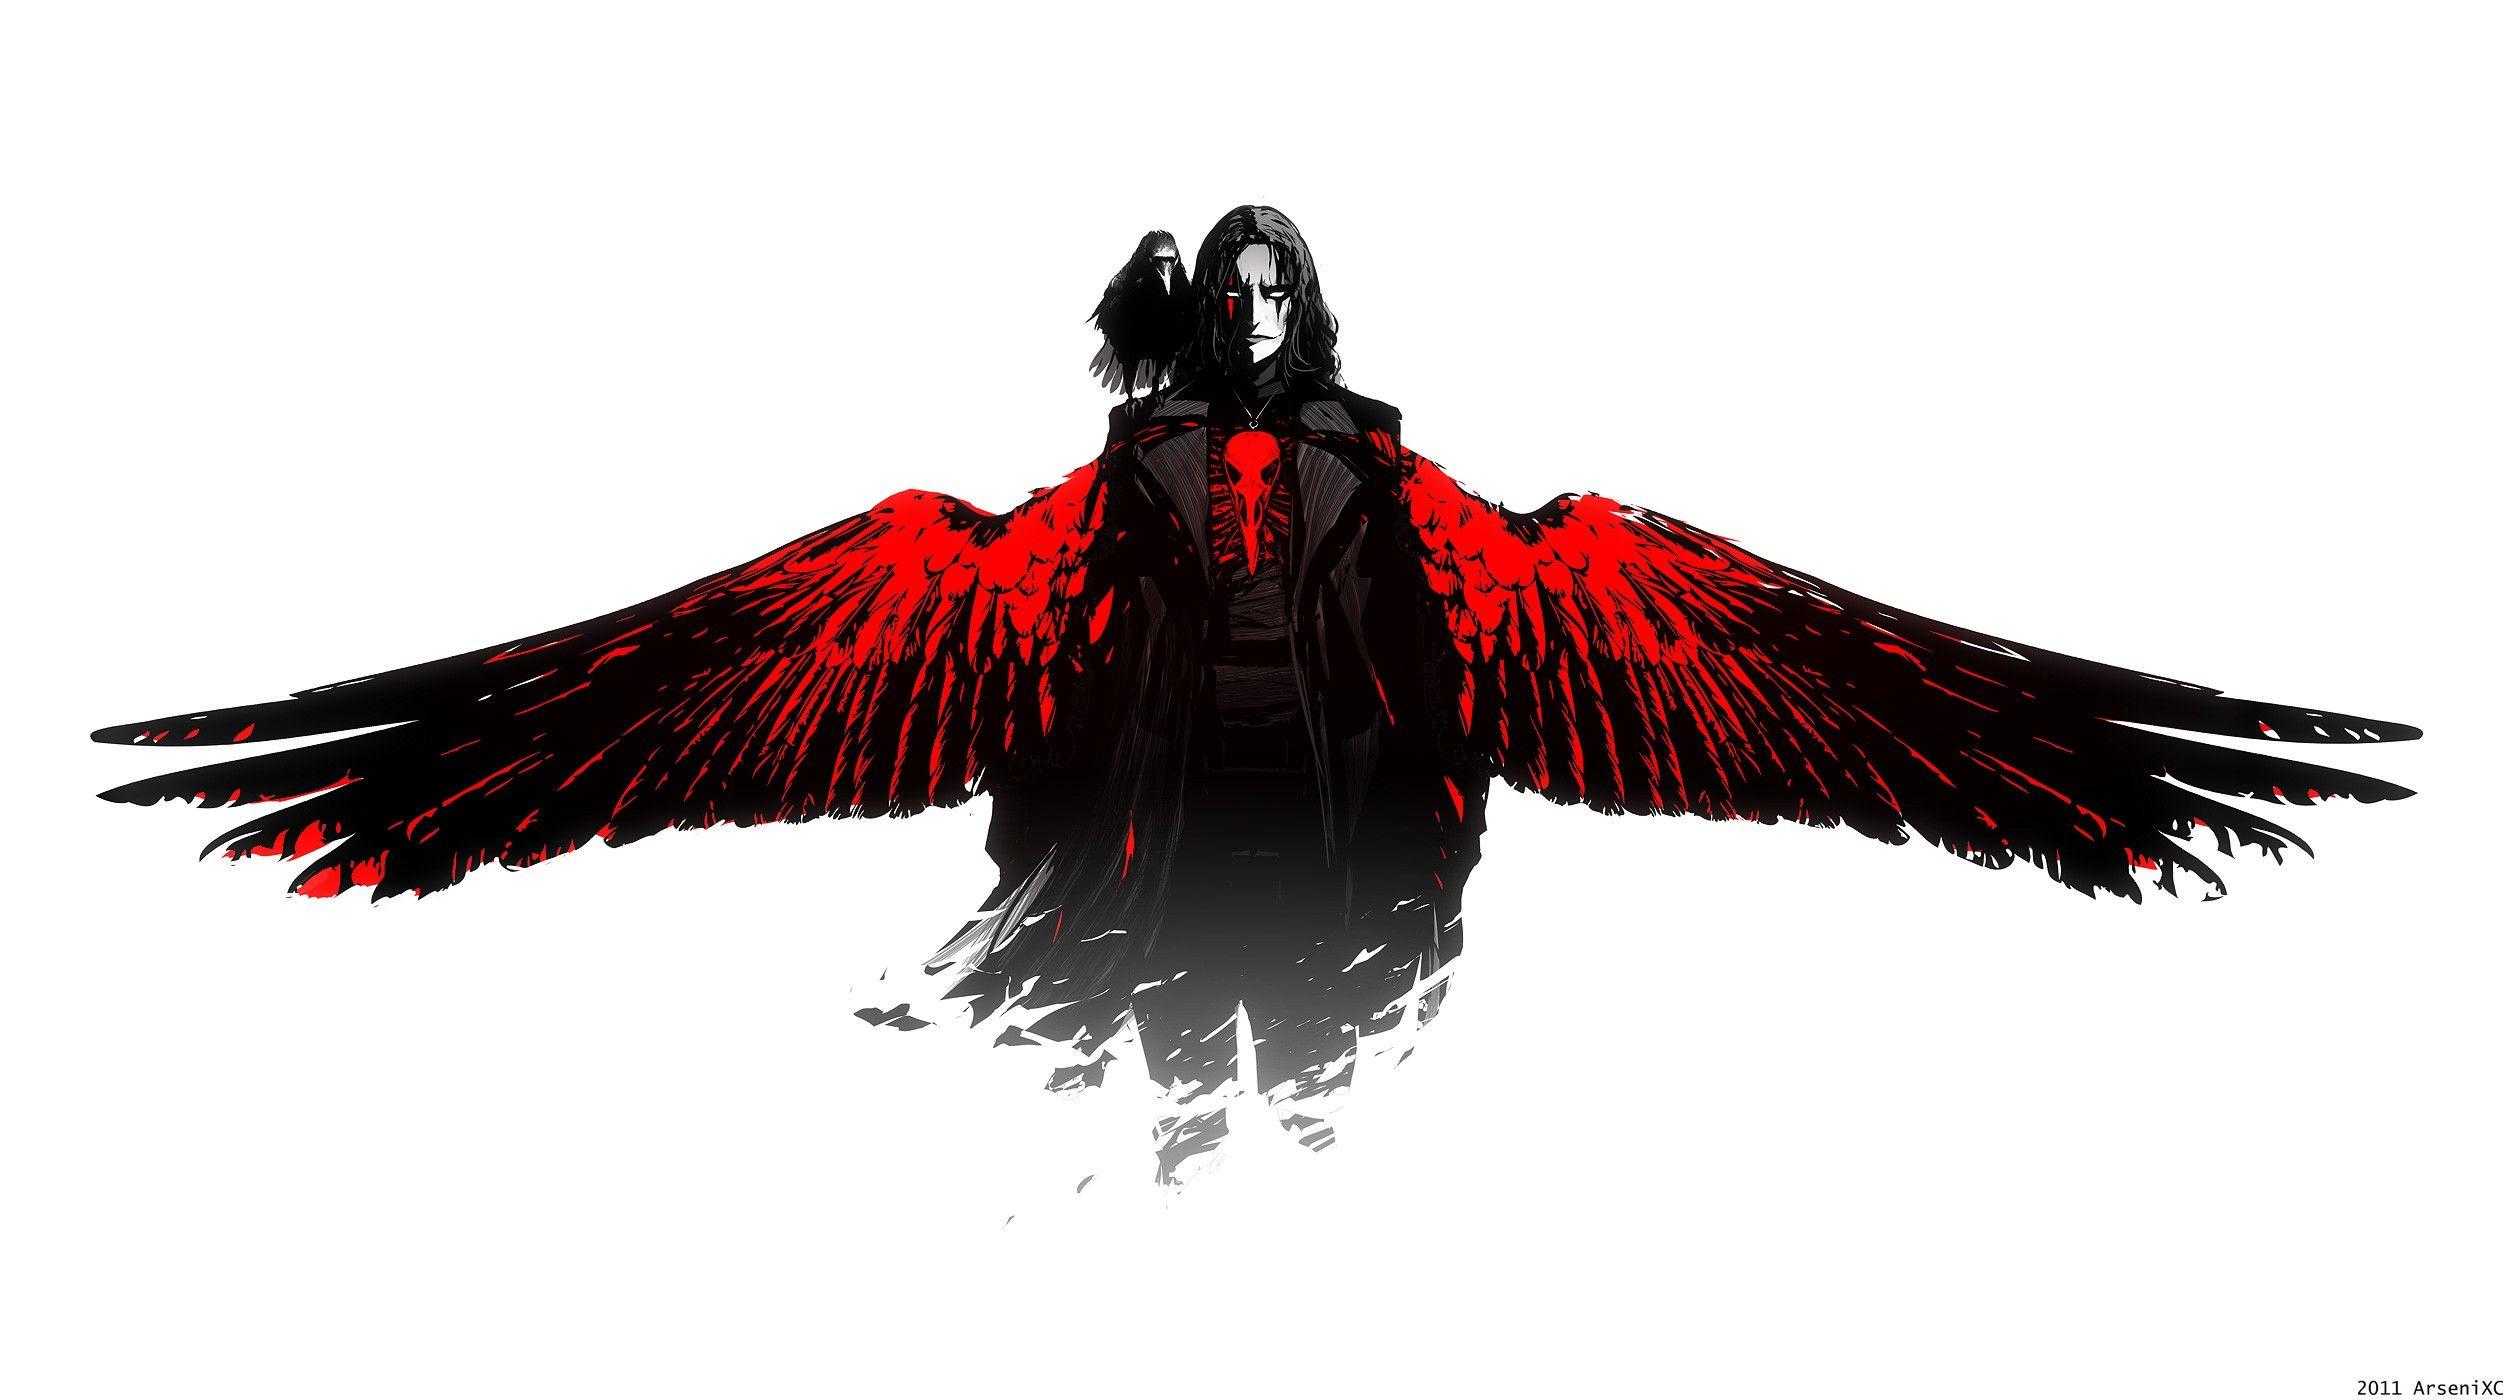 The Crow Wallpaper HD Download. James O' Barr's 'The Crow